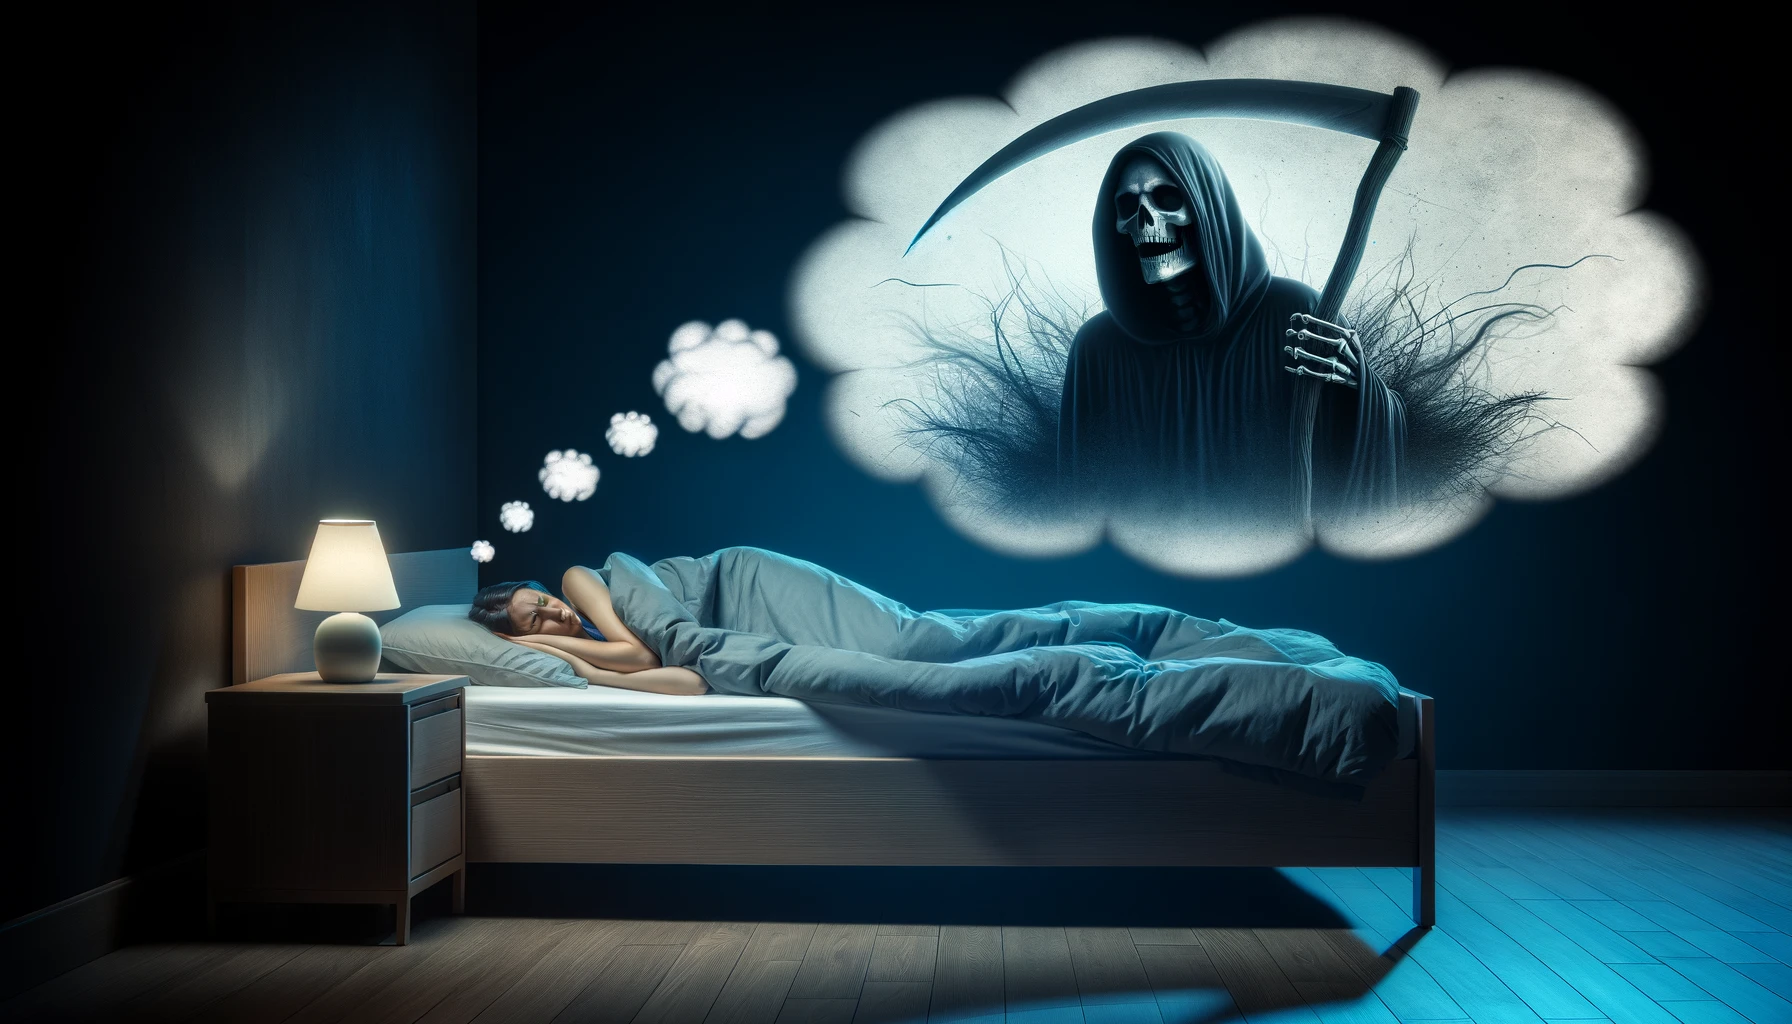 Grim Reaper dream meaning featured image